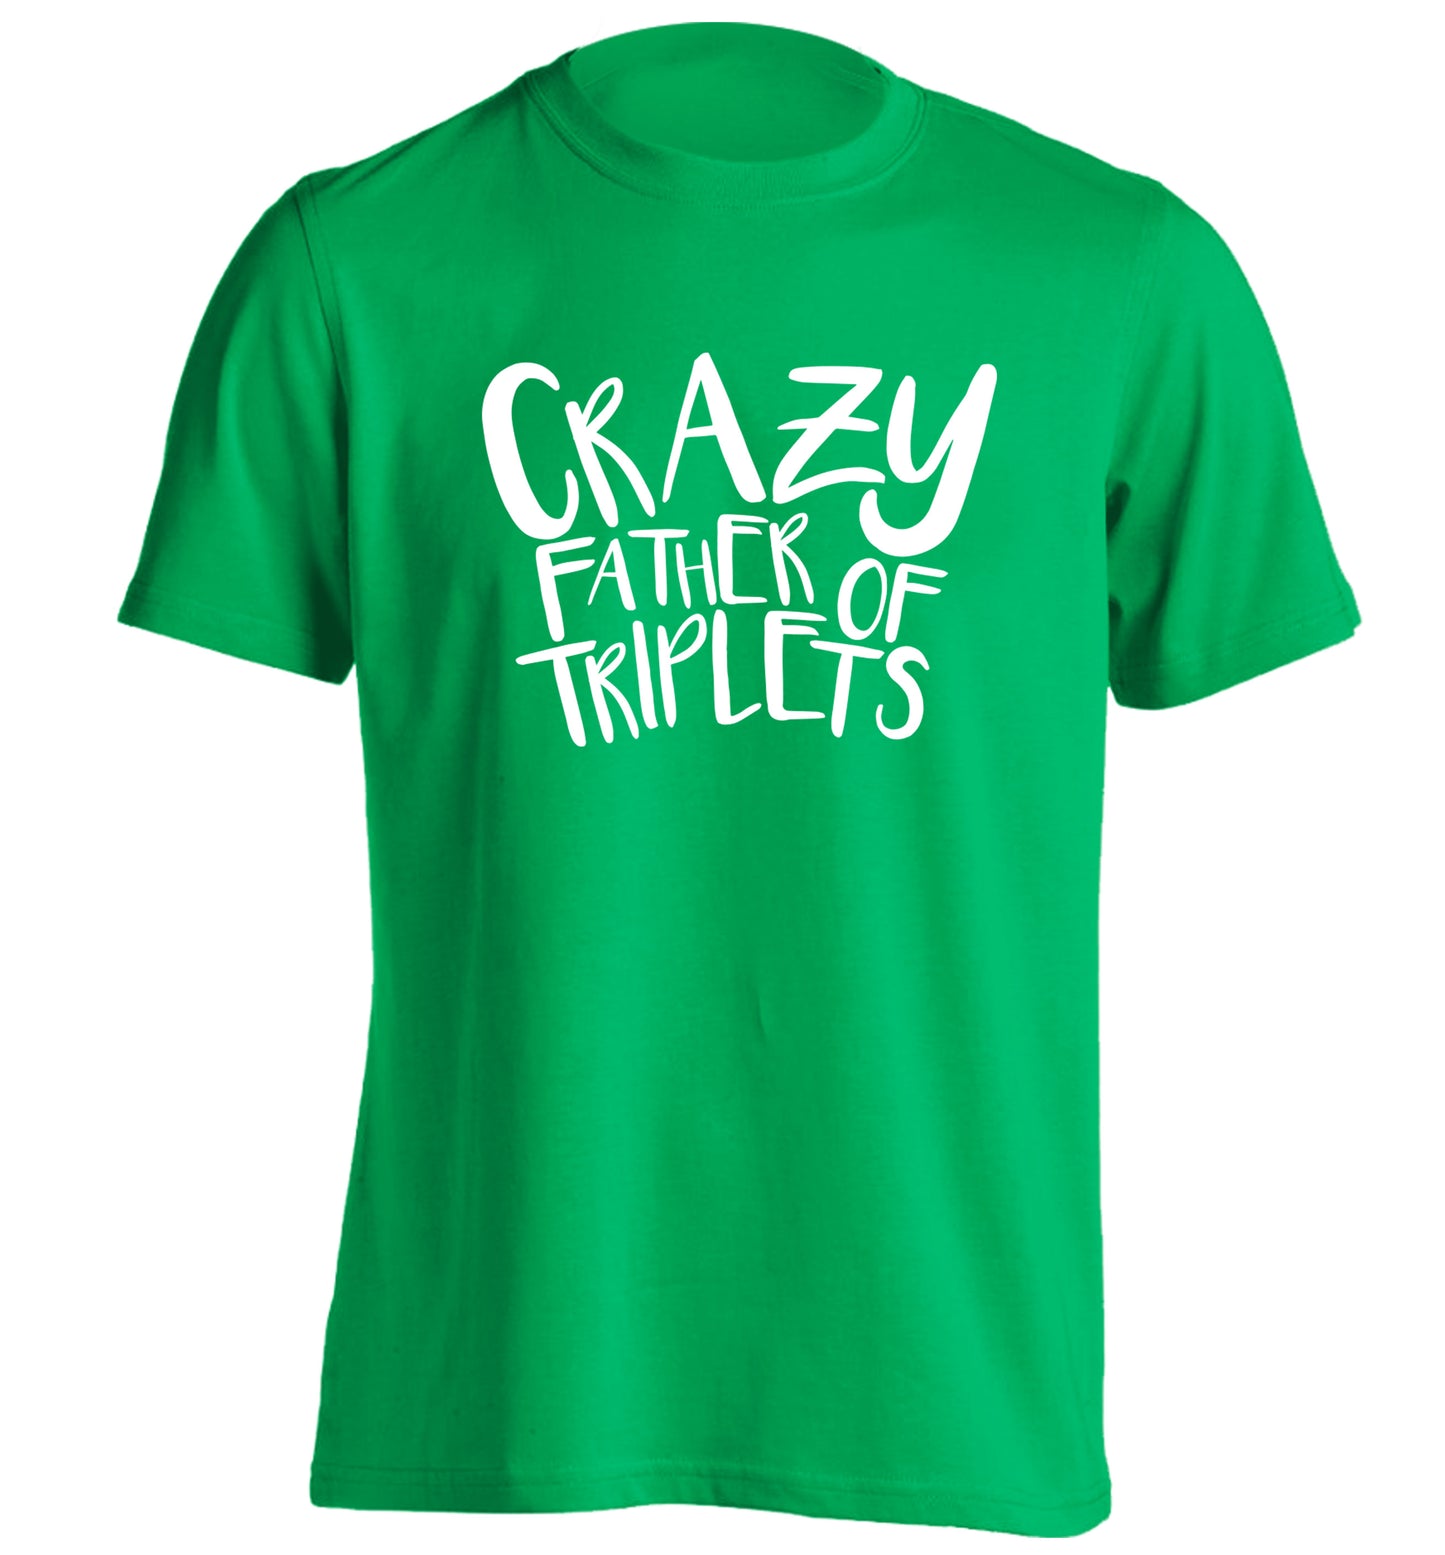 Crazy father of triplets adults unisex green Tshirt 2XL